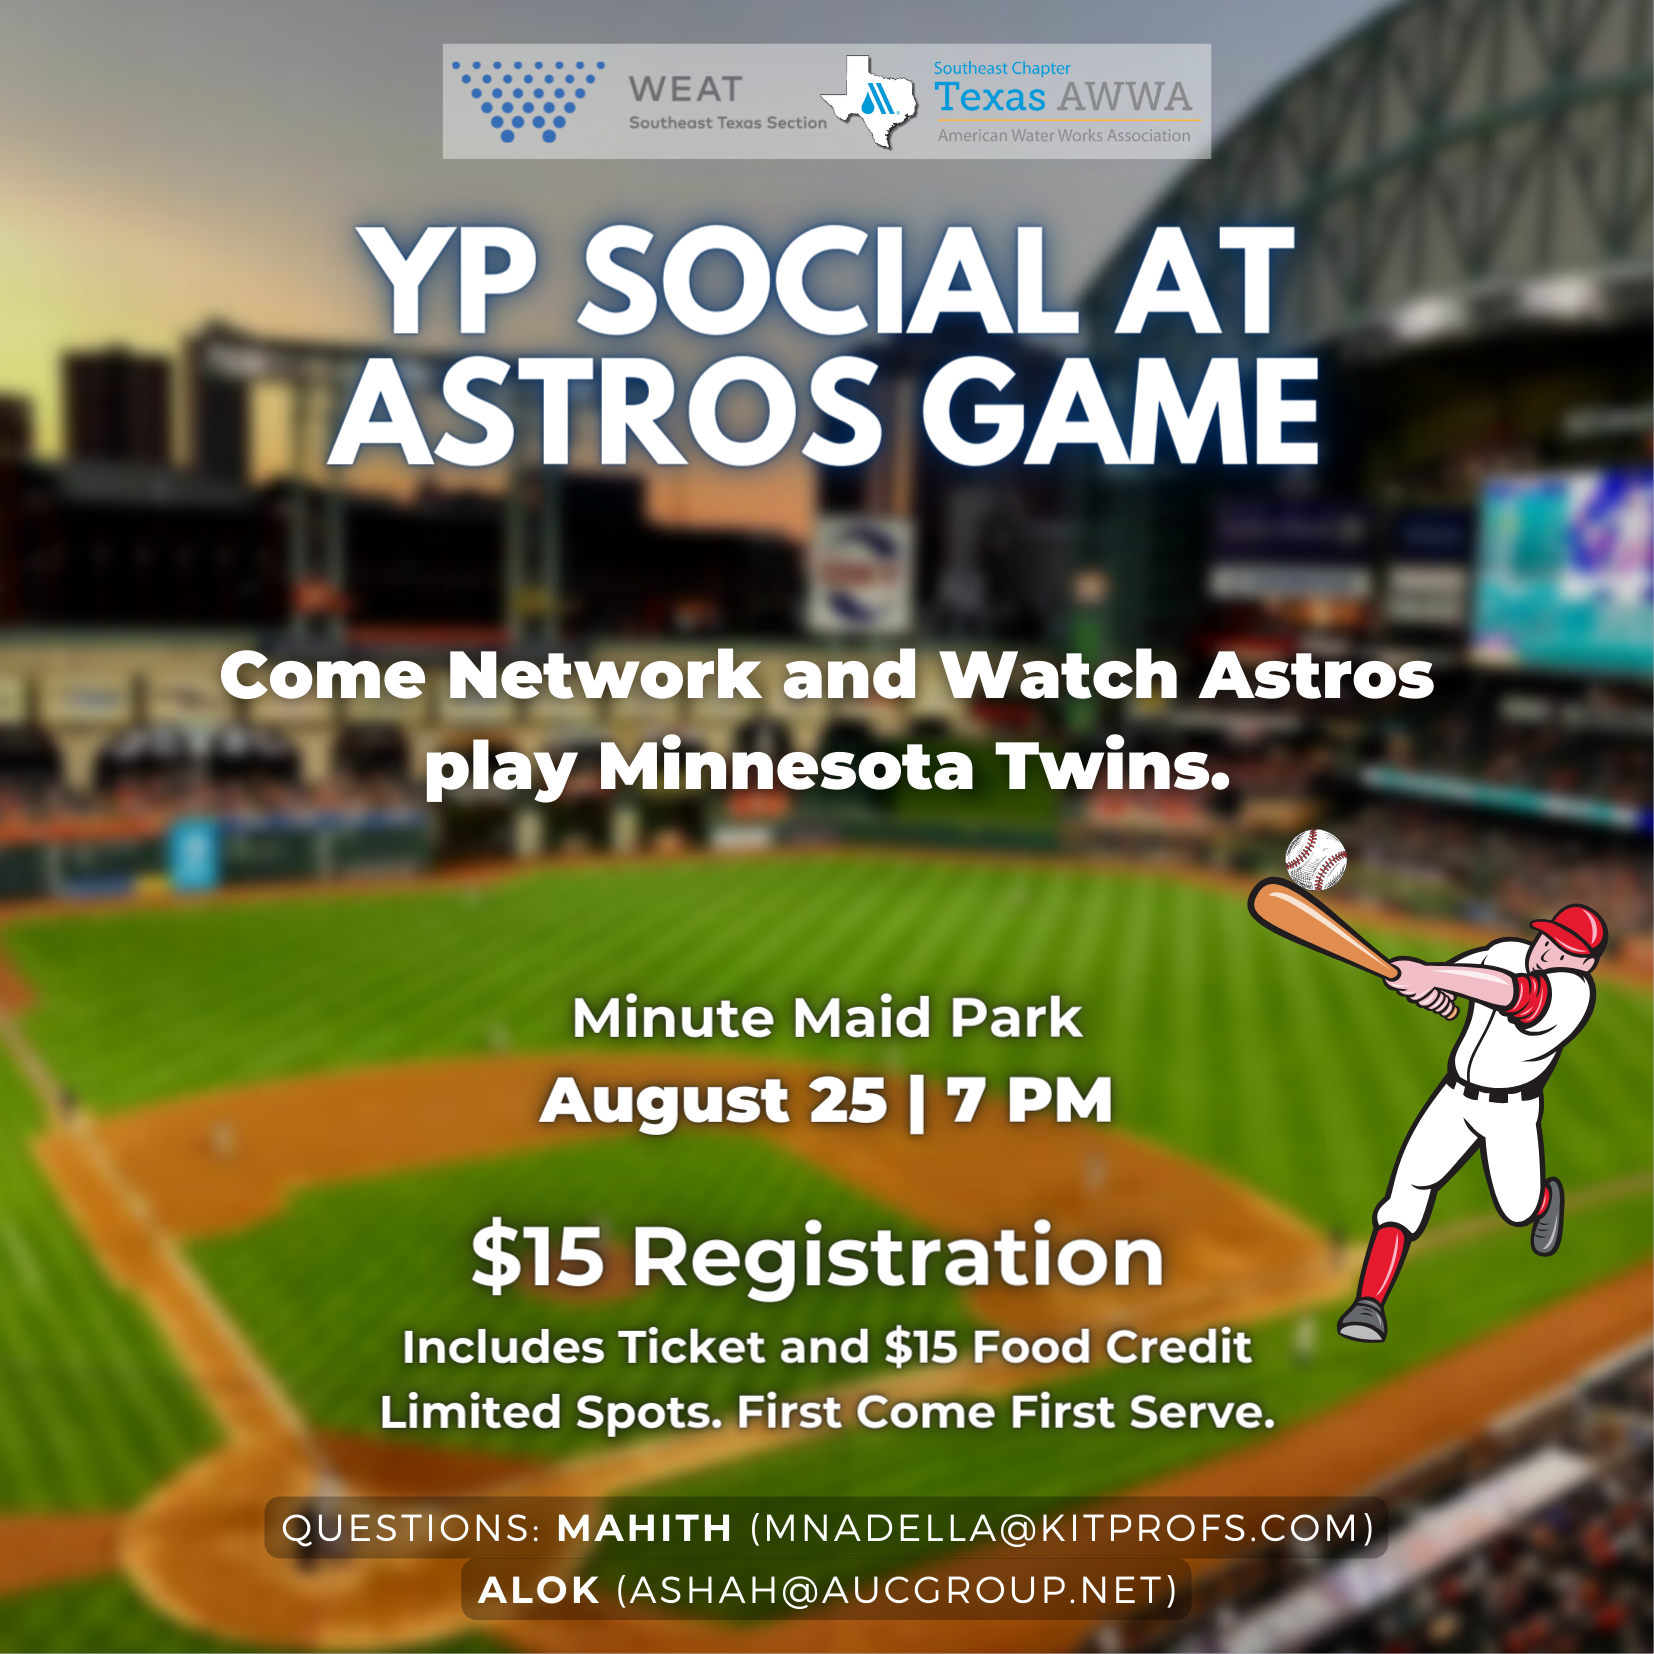 WEAT/TAWWA YP Astros Game Event